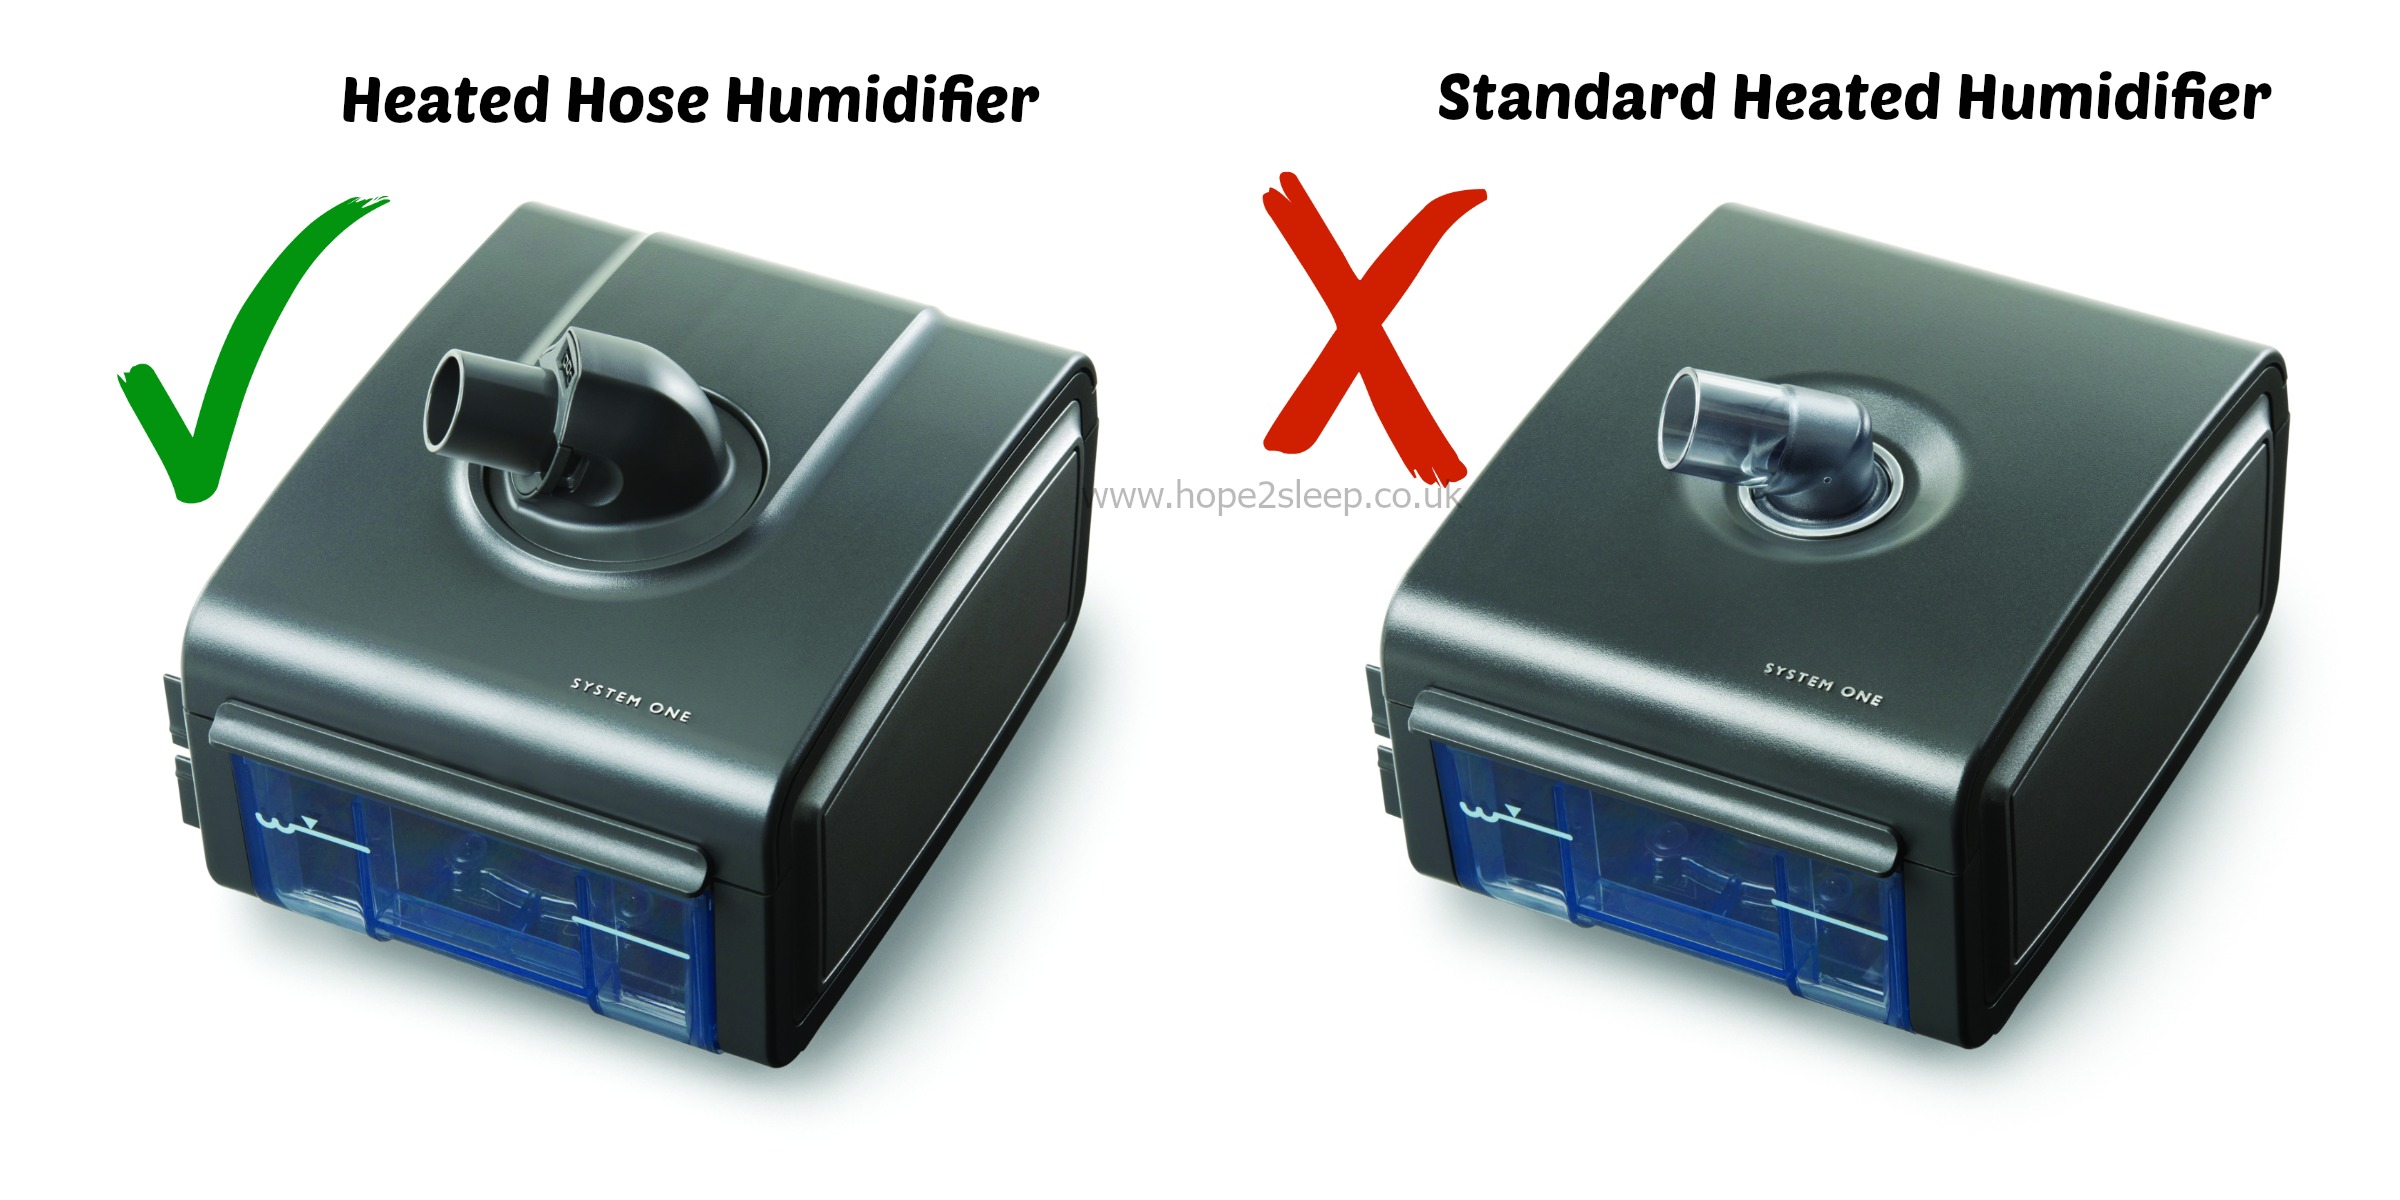 SystemOne Humidifiers - Standard vs Heated Tube